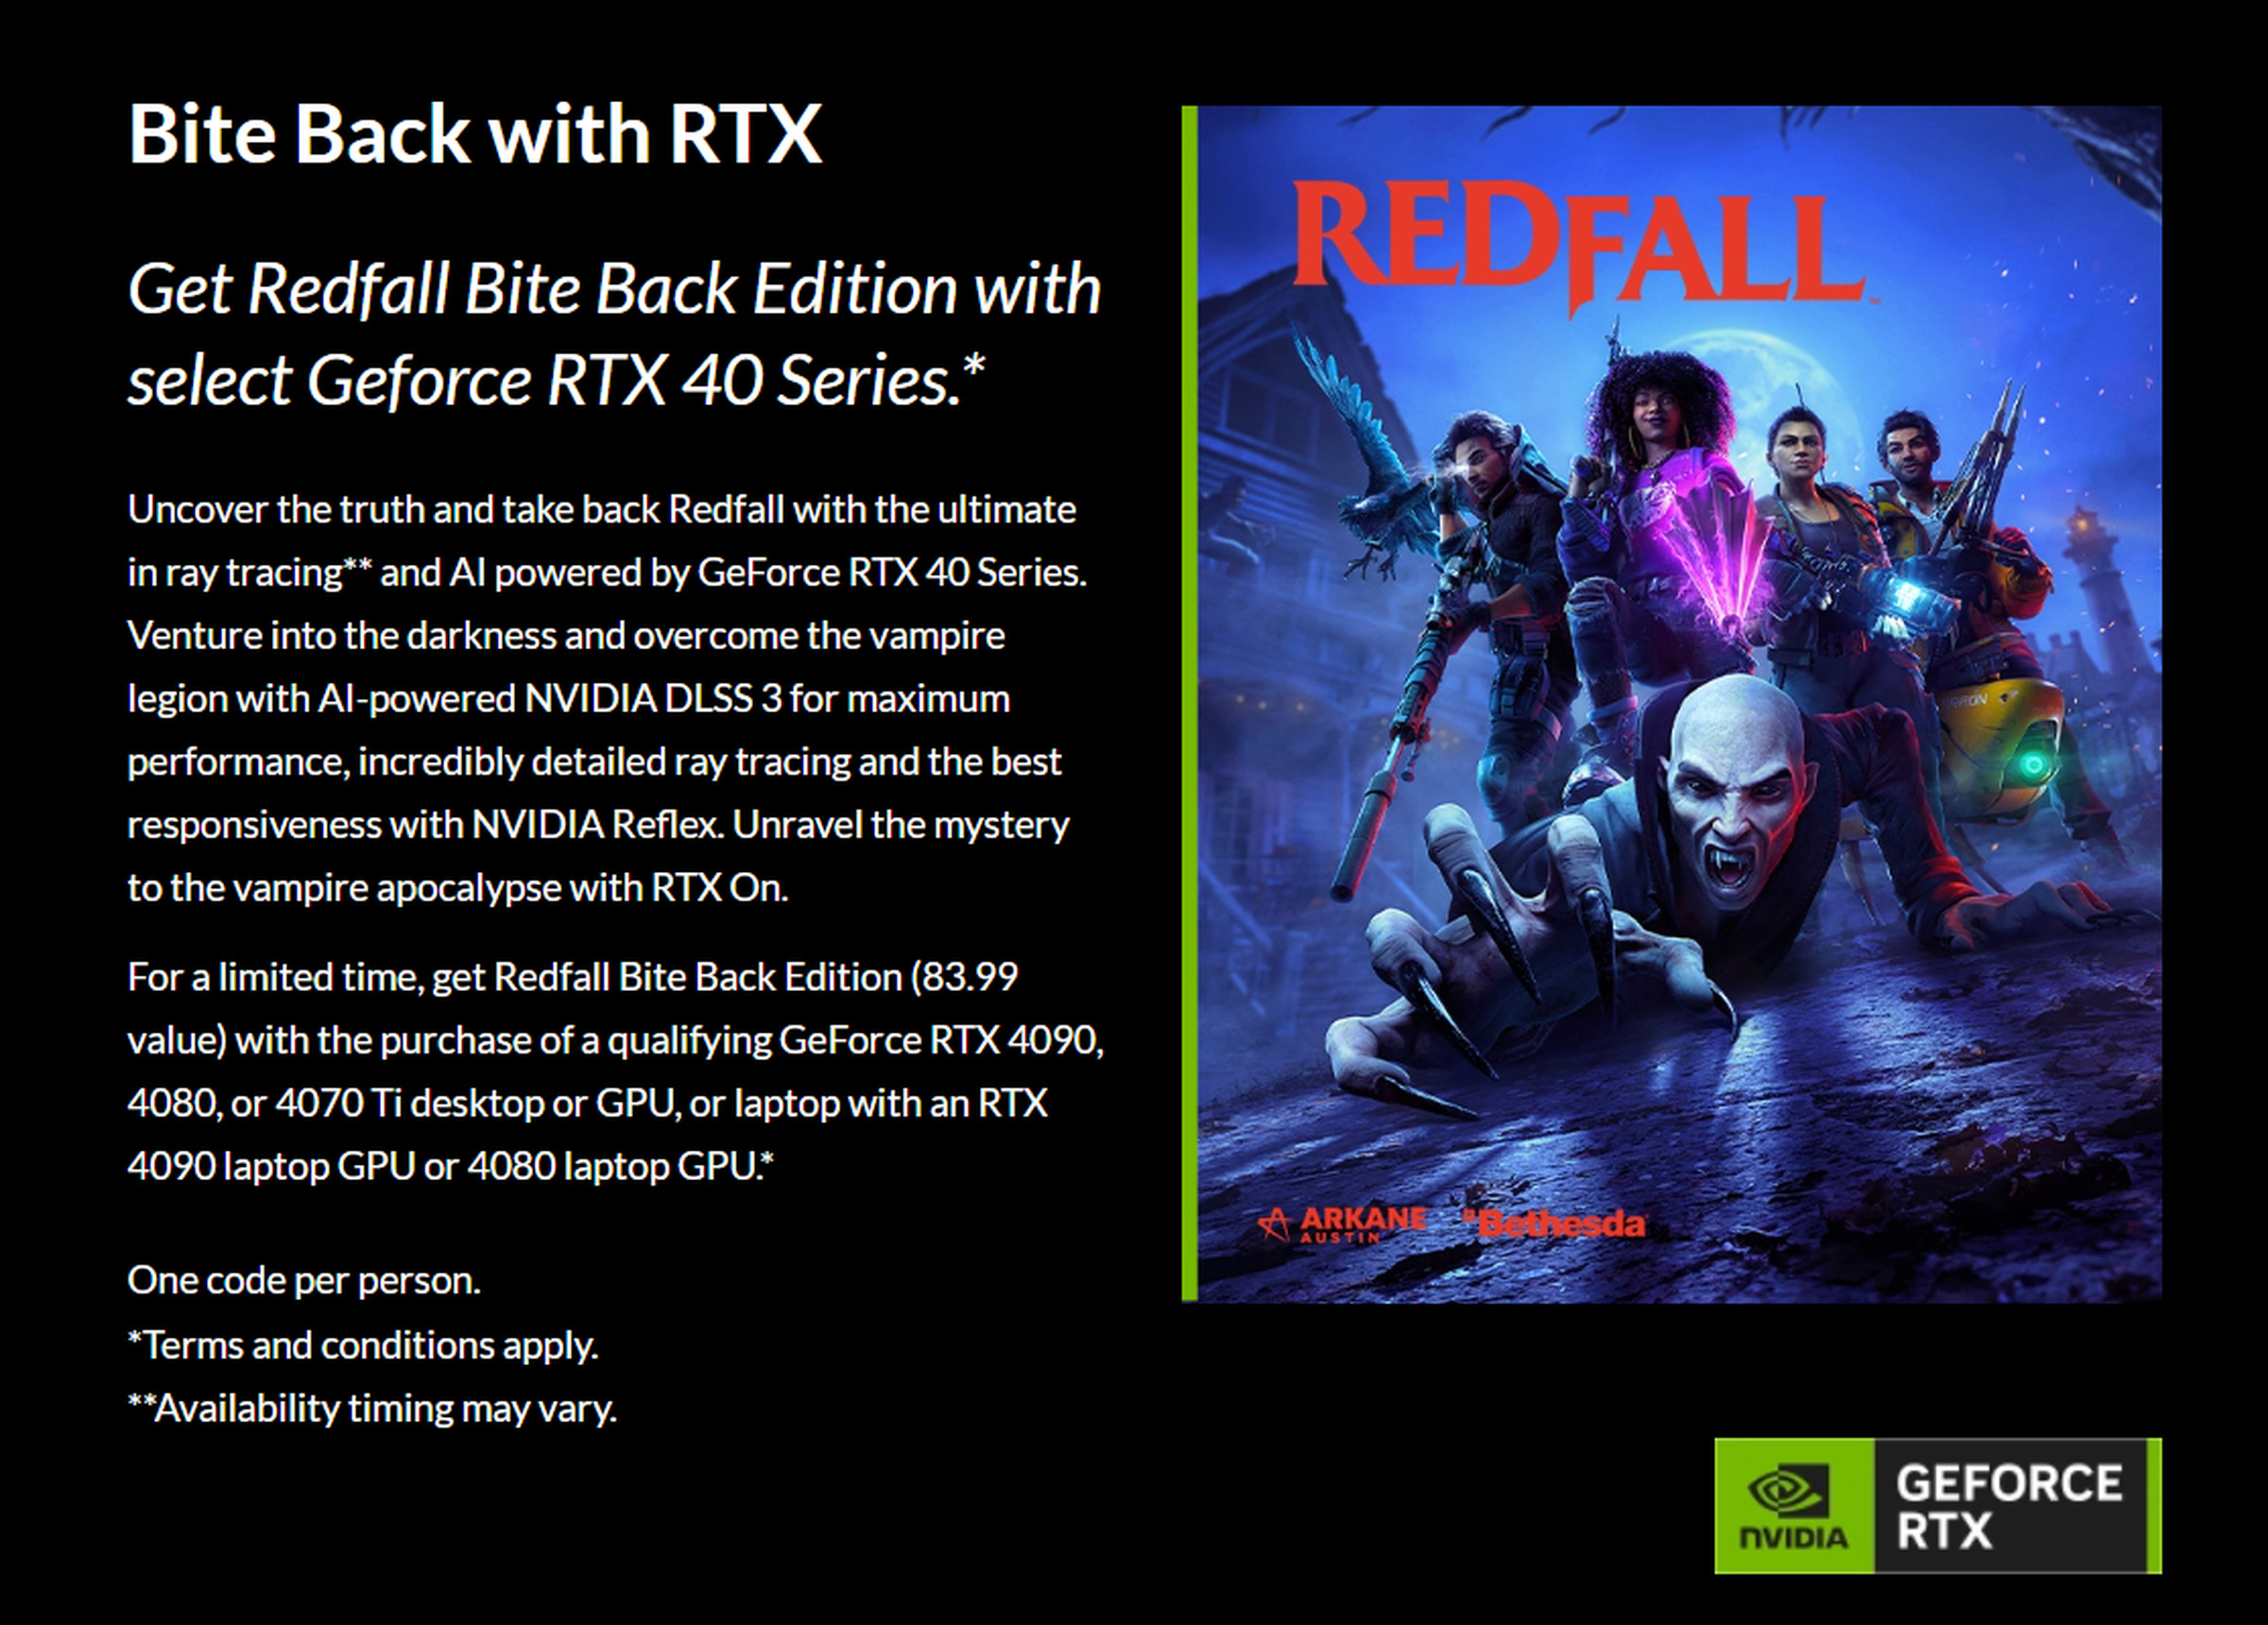 The Redfall Nvidia promotional material.